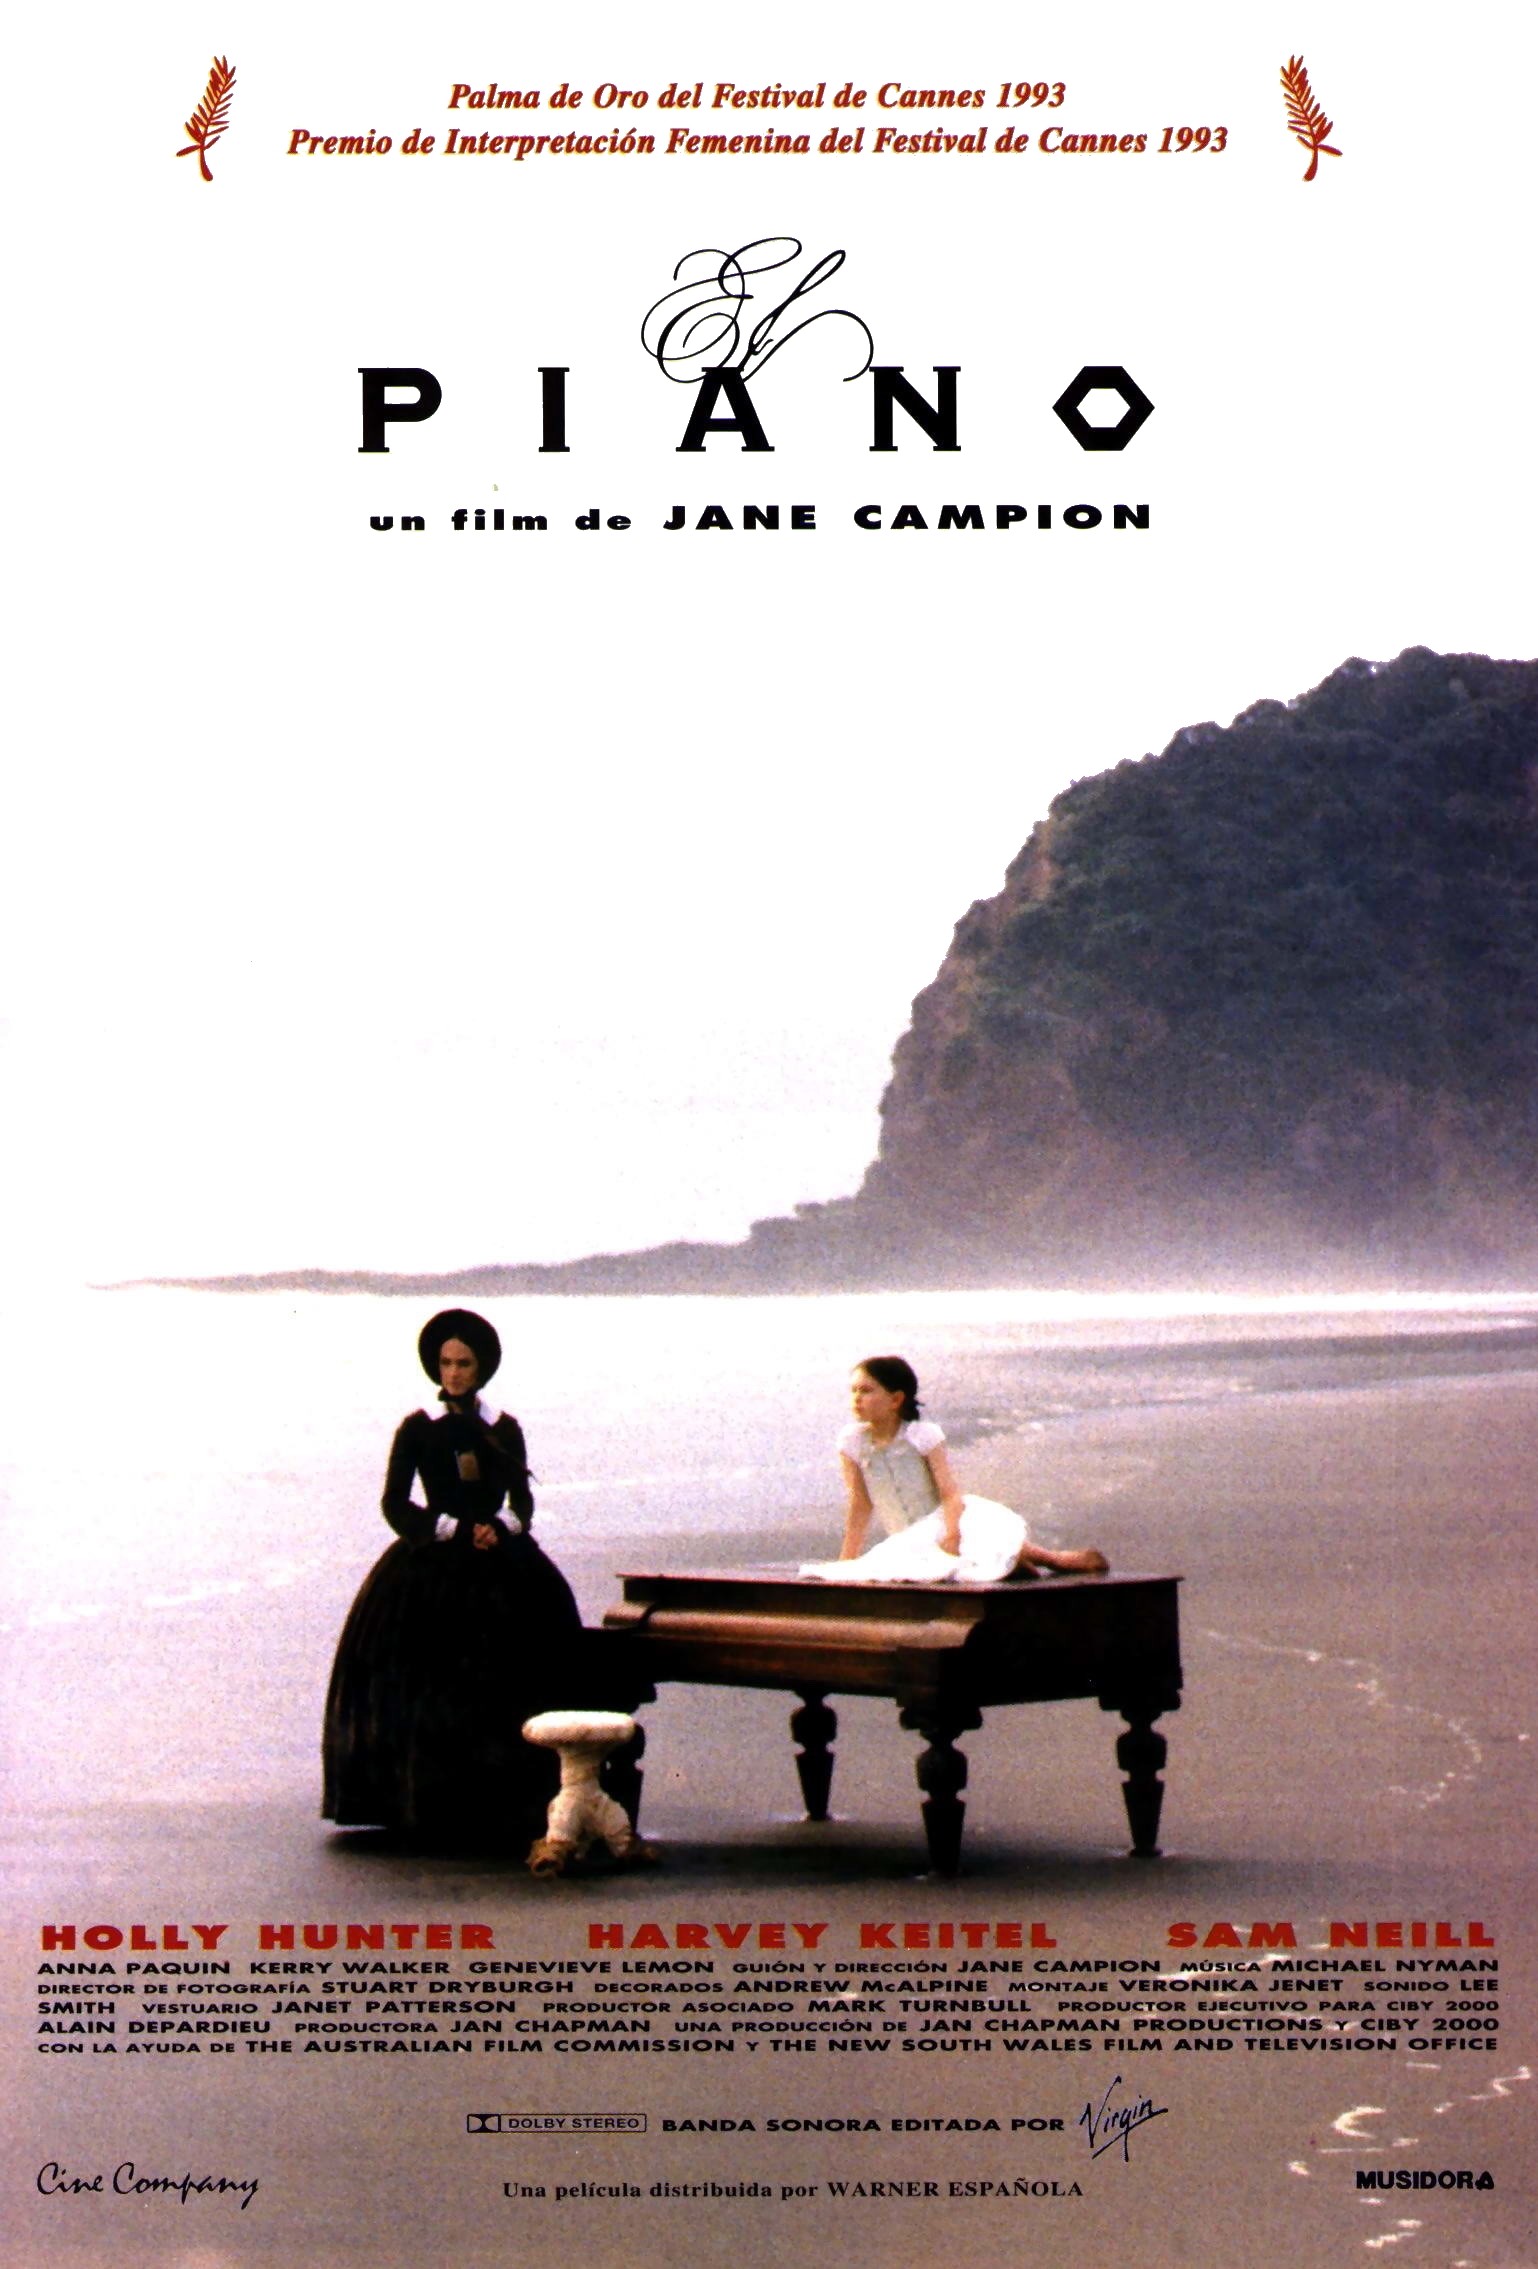 Occur I read a book Thank you The Piano - Pianul (1993) - Film - CineMagia.ro